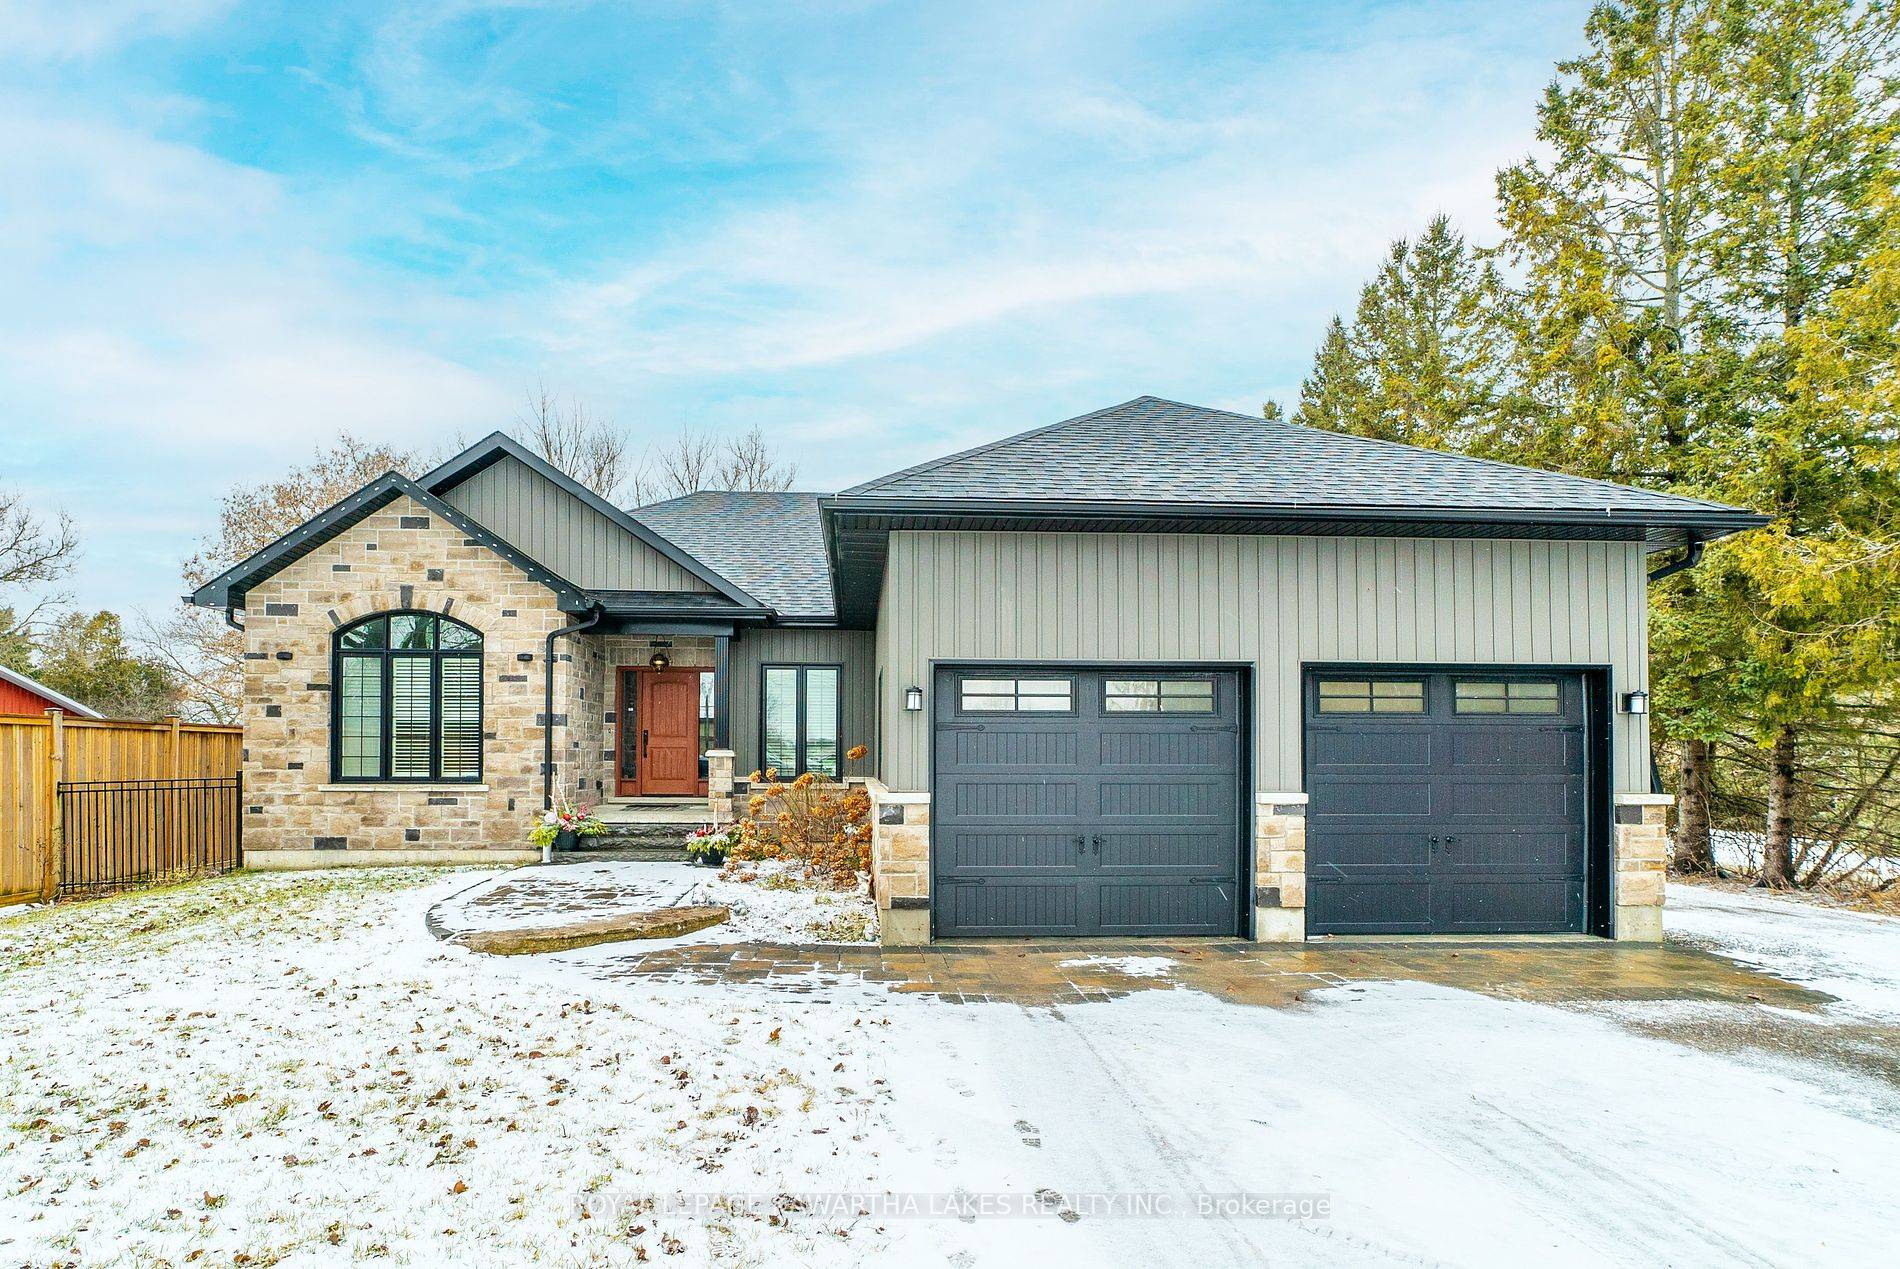 Newly built 3 1 bedroom 3 bath bungalow located in the quiet village of Lorneville.